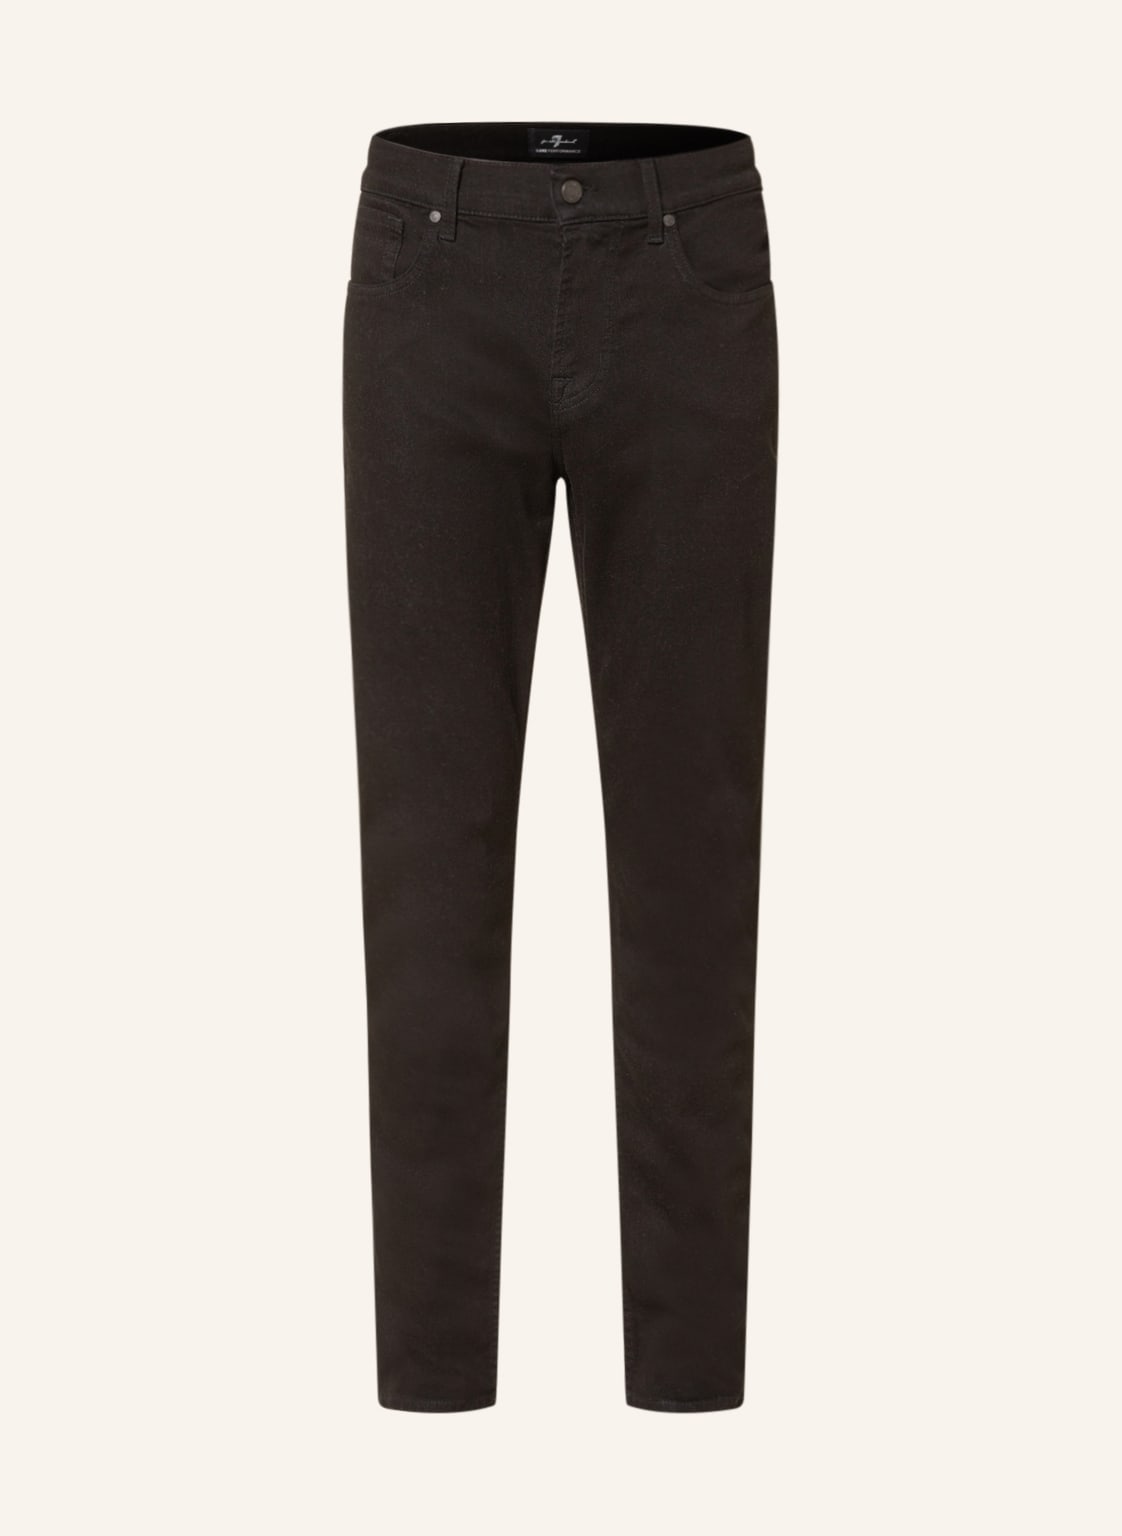 Image of 7 For All Mankind Jeans Slimmy Tapered Modern Slim Fit schwarz